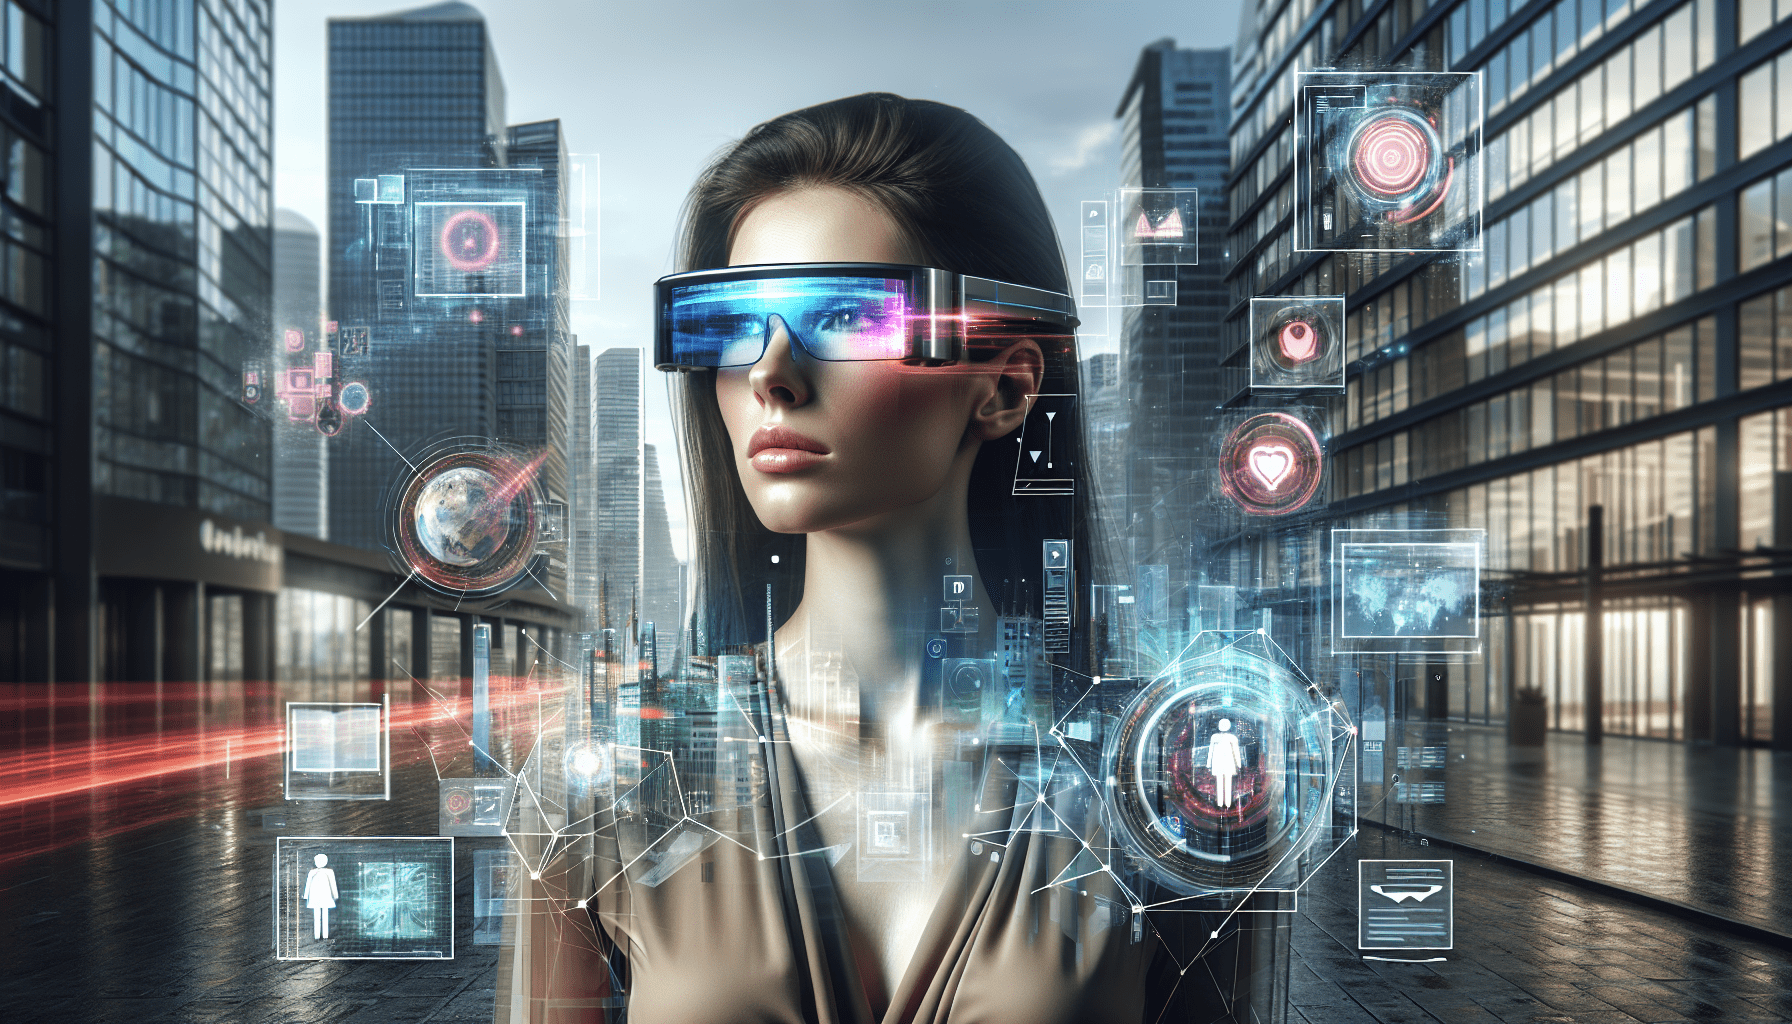 the-magic-of-augmented-reality-what-it-is-and-how-its-used-1 The Magic of Augmented Reality: What It Is and How It's Used